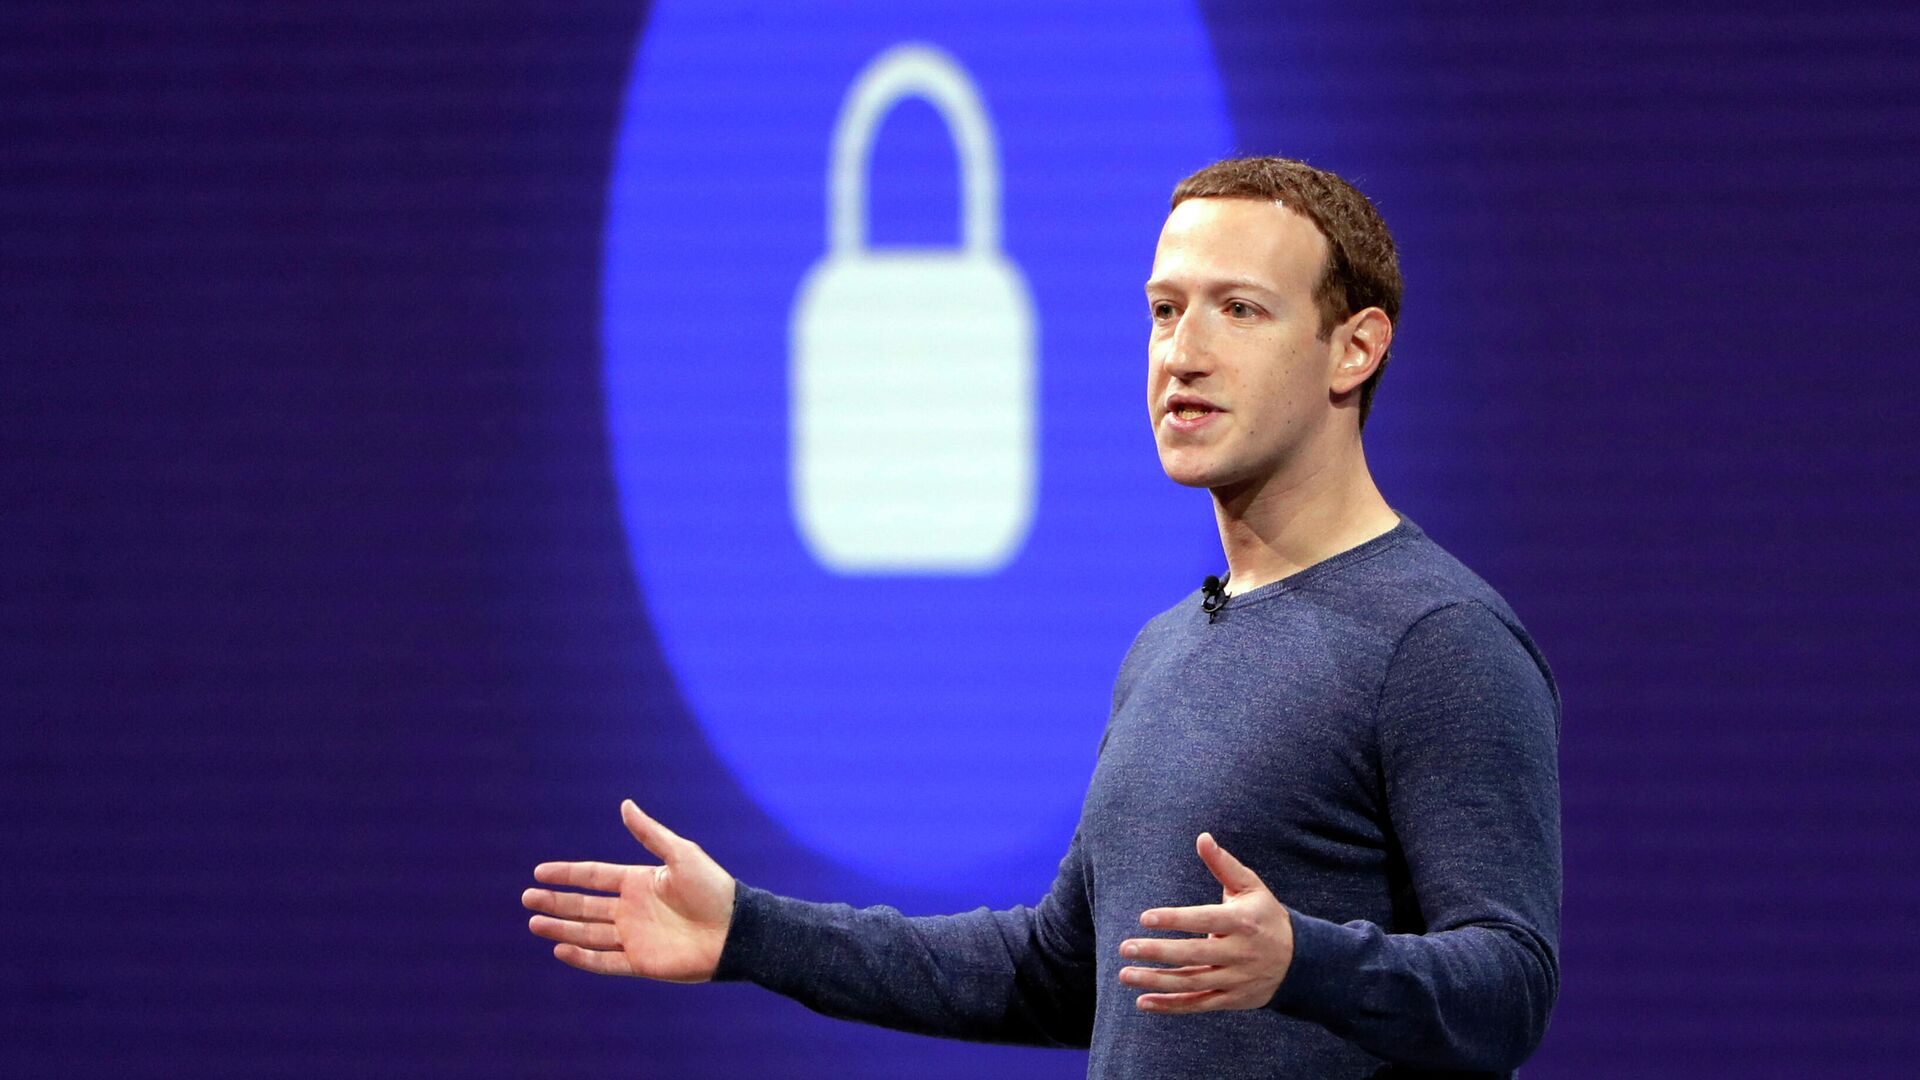 In this May 1, 2018, file photo, Facebook CEO Mark Zuckerberg delivers the keynote speech at F8, Facebook's developer conference, in San Jose, Calif. Sen. Richard Blumenthal, D-Conn., who heads the Senate Commerce subcommittee on consumer protection, called in a sharply worded letter Wednesday, Oct. 20, 2021, for Facebook founder, Zuckerberg, to testify before the panel on Instagram’s effects on children. - Sputnik International, 1920, 16.01.2023